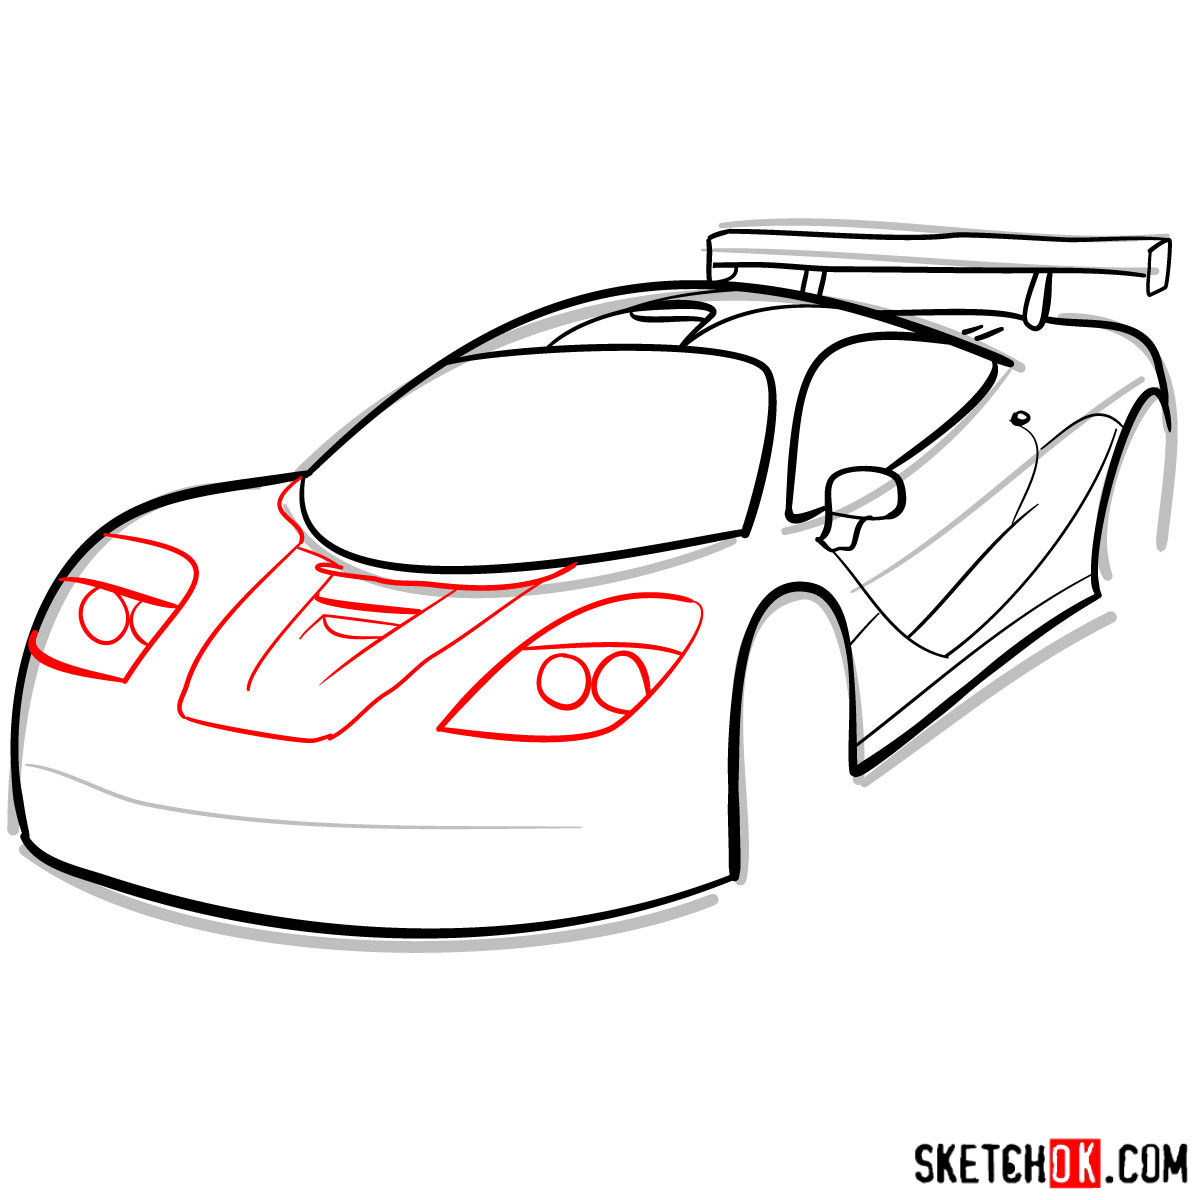 McLaren F1 - step by step drawing guide - step 08